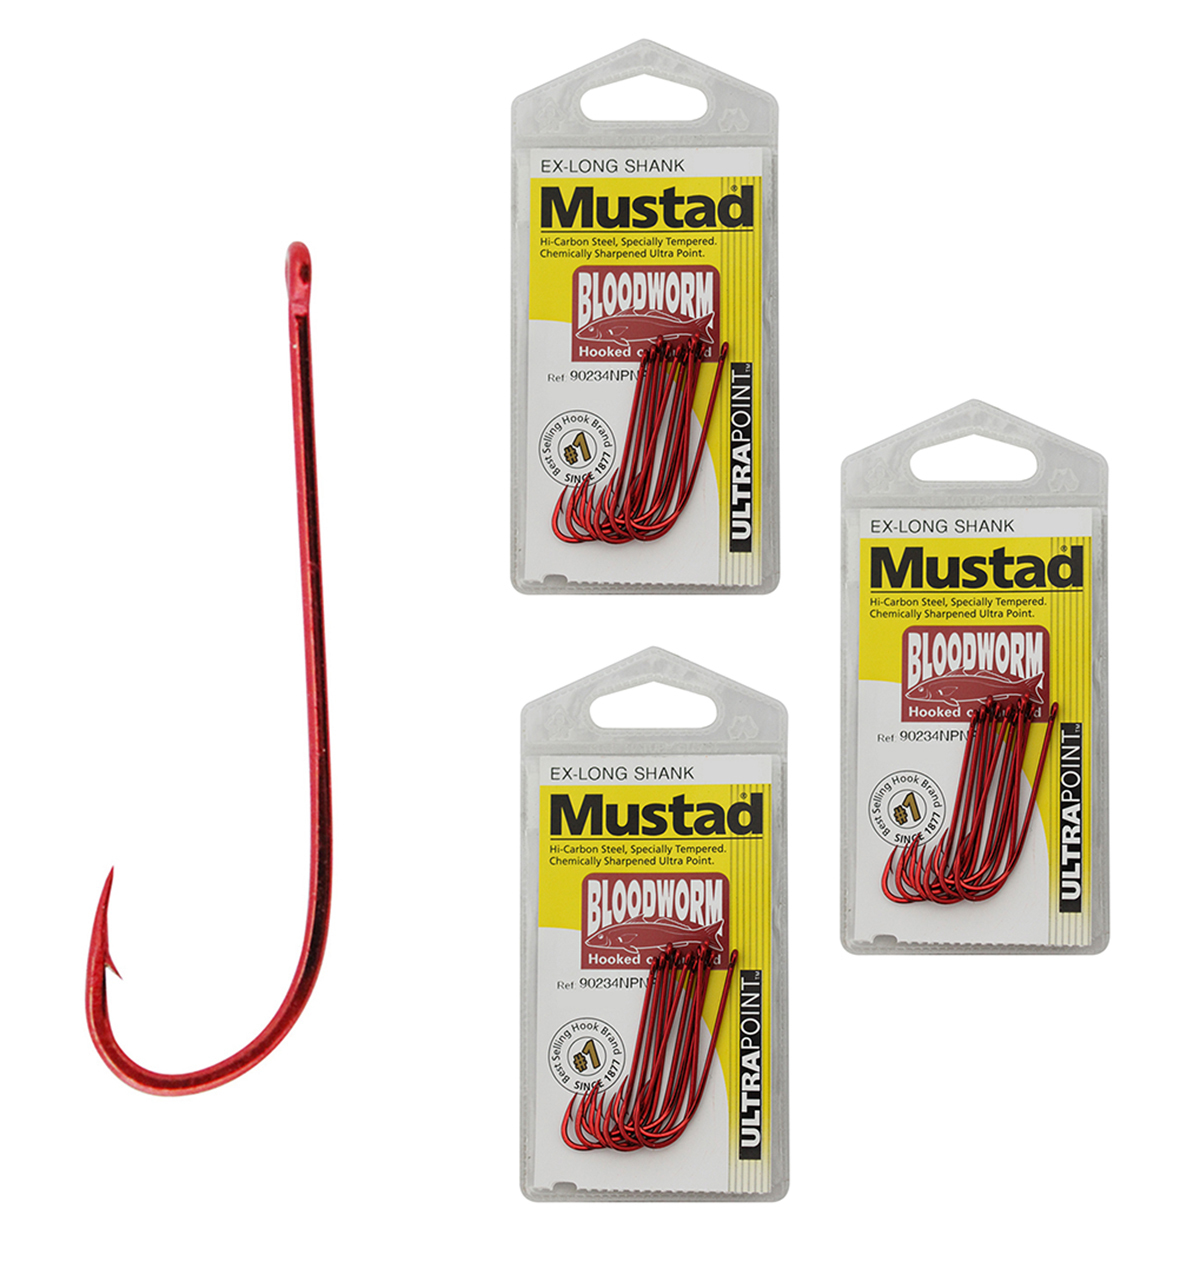 Mustad Bloodworm Size 2-90234npnr-Bulk 3 Pack-Chemically Sharpened